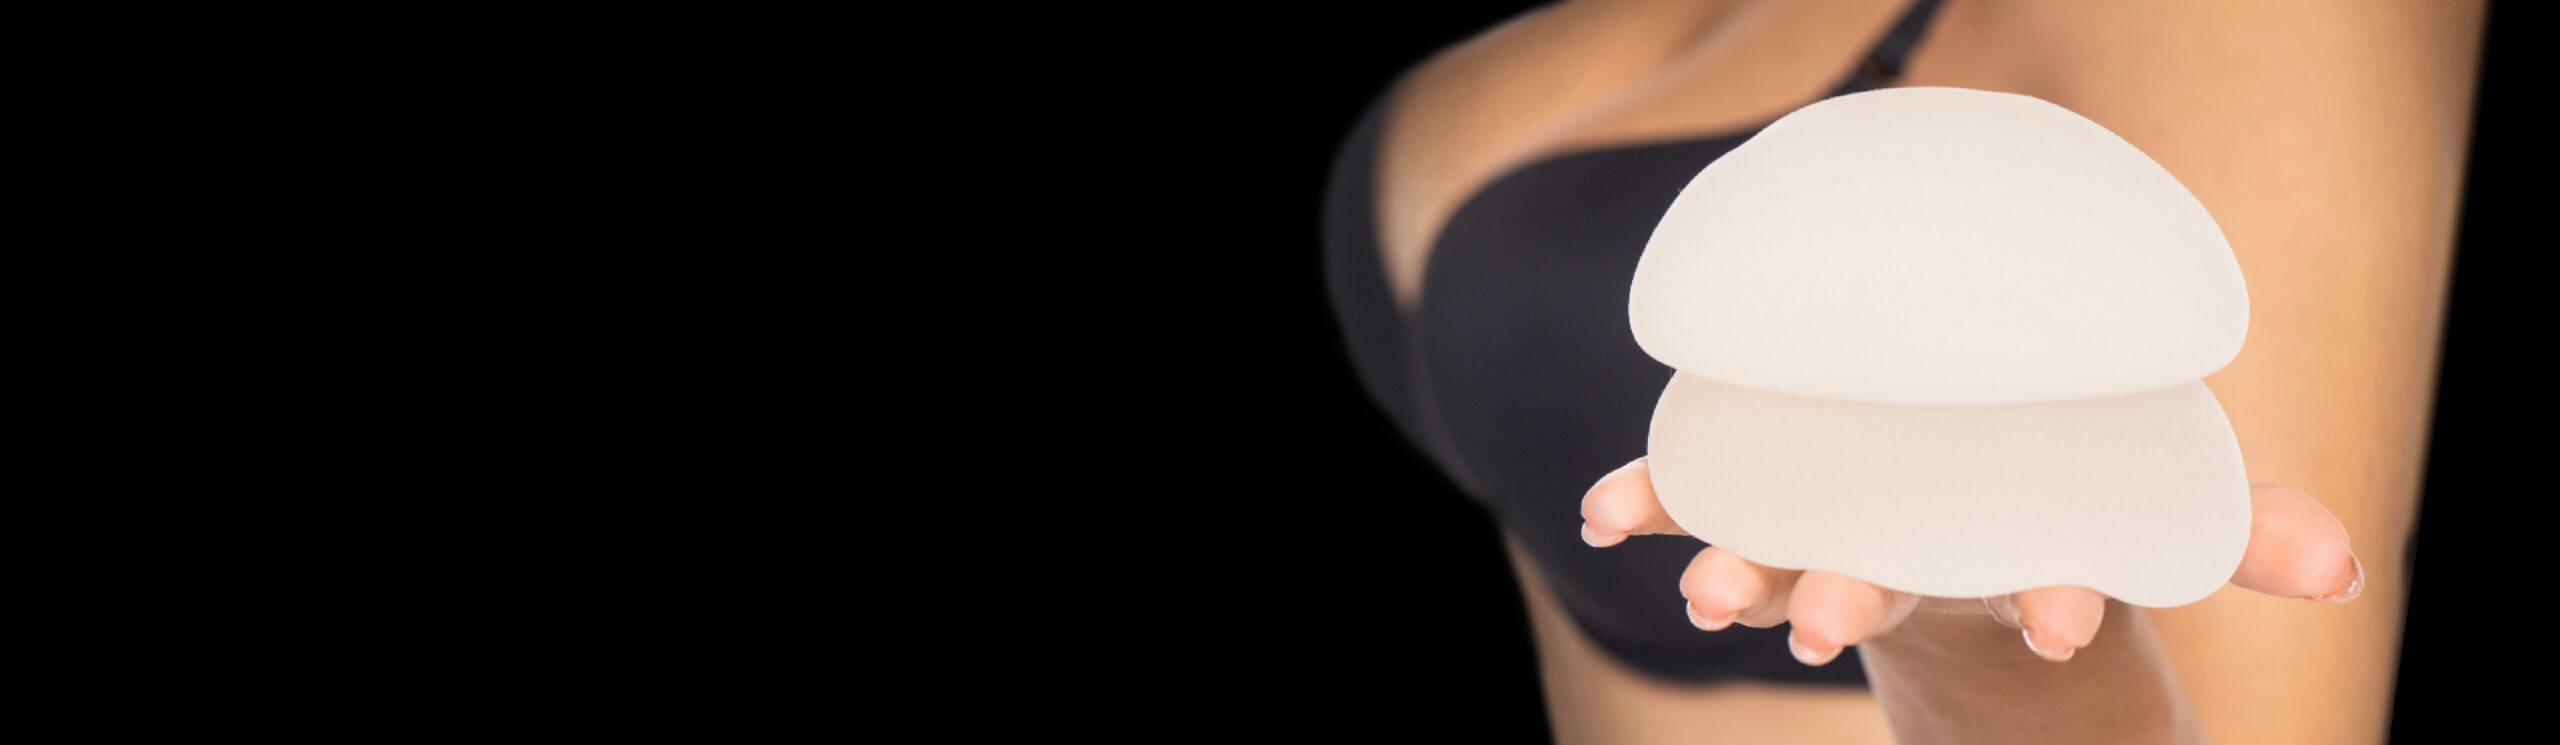 Teardrop vs. Round Implants: Which Breast Implants Are Right For Me?